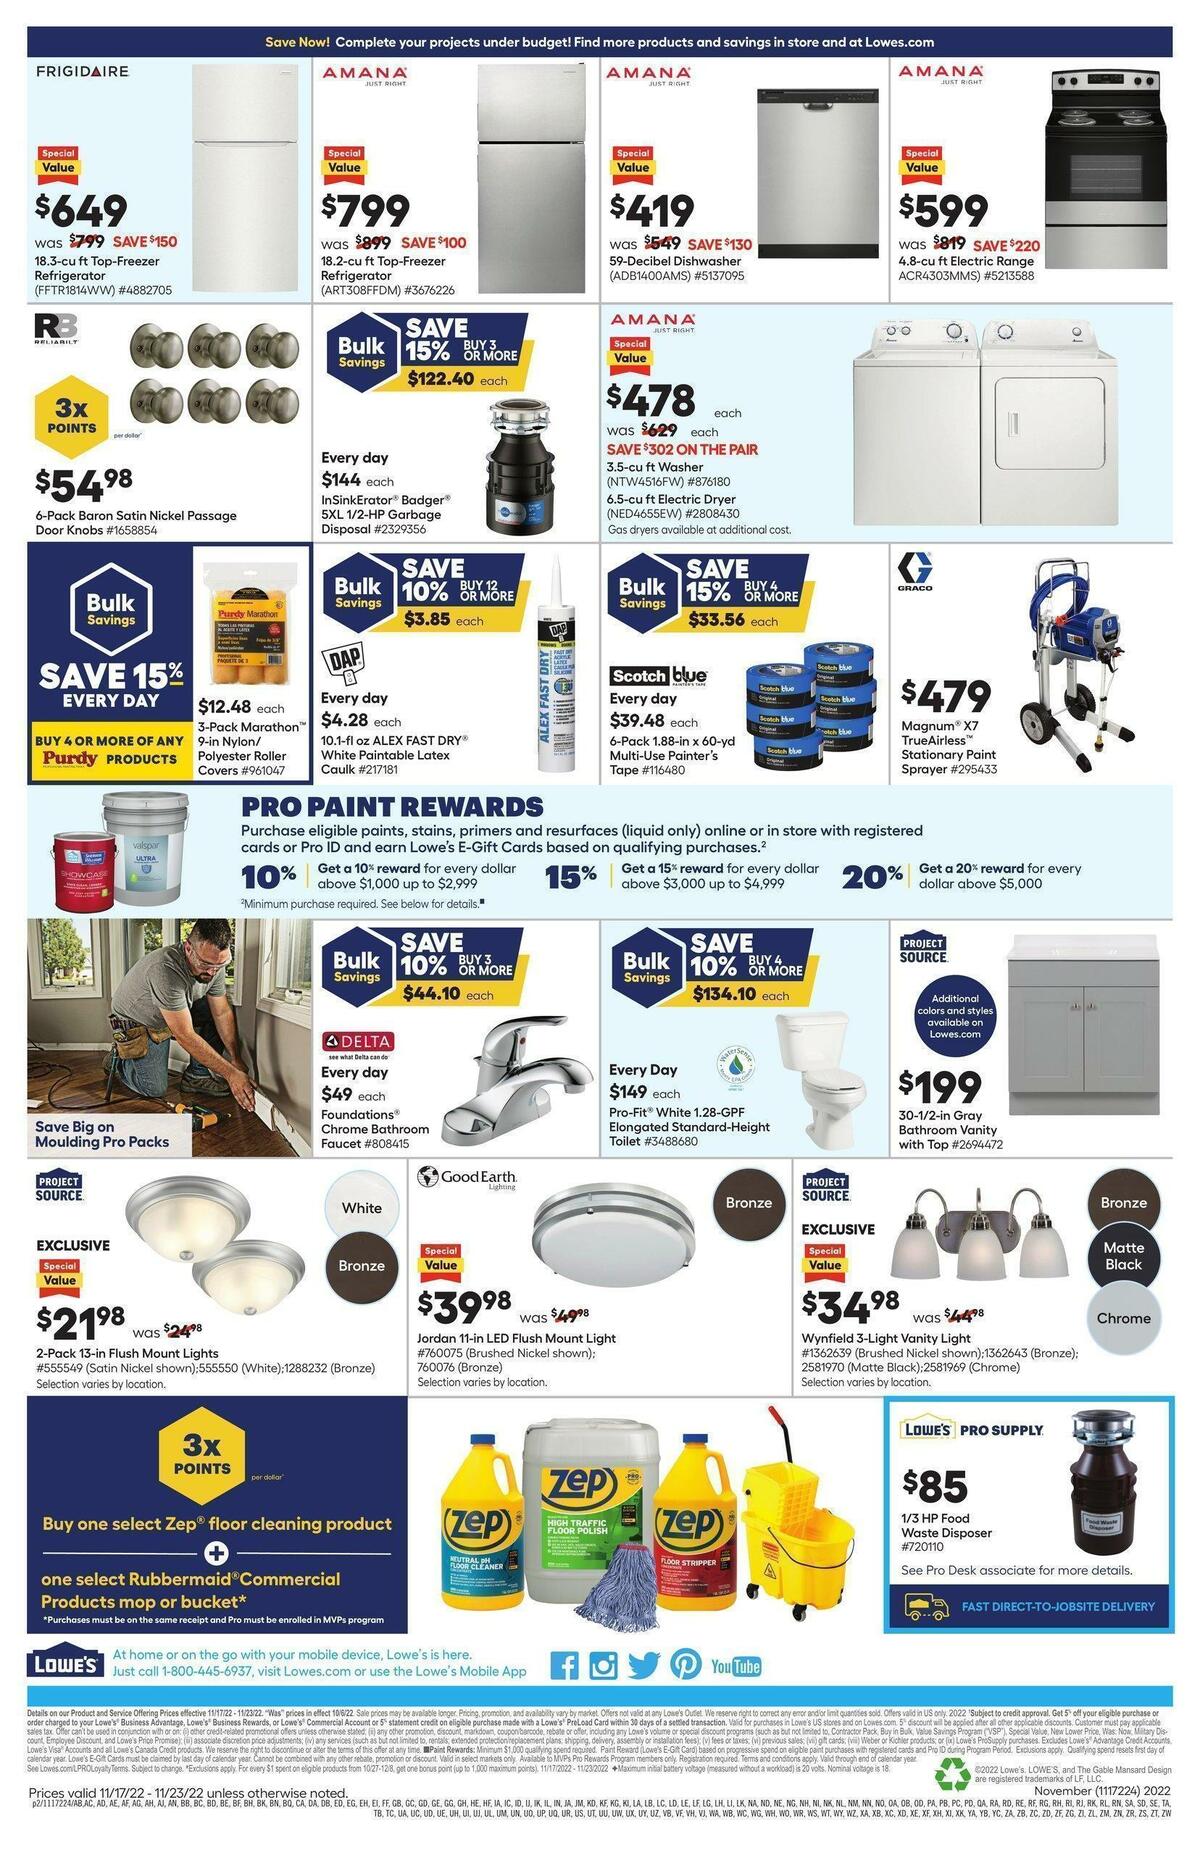 Lowe's Pro Ad Weekly Ad from November 17